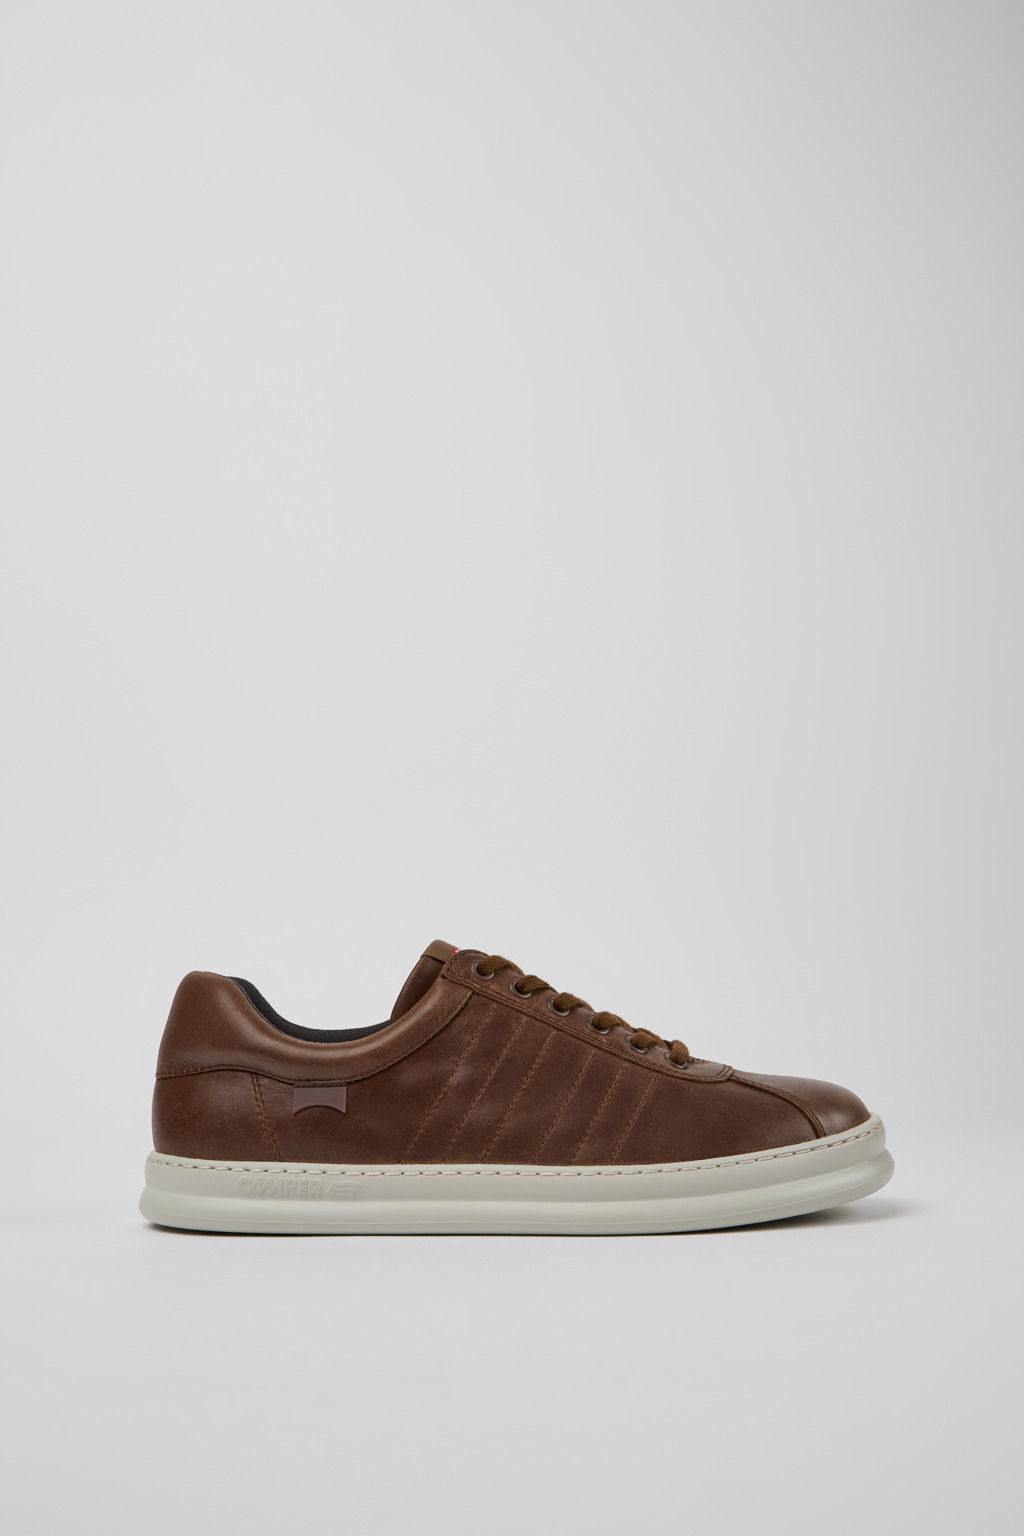 runner Brown Sneakers for Men - Fall/Winter collection - Camper USA